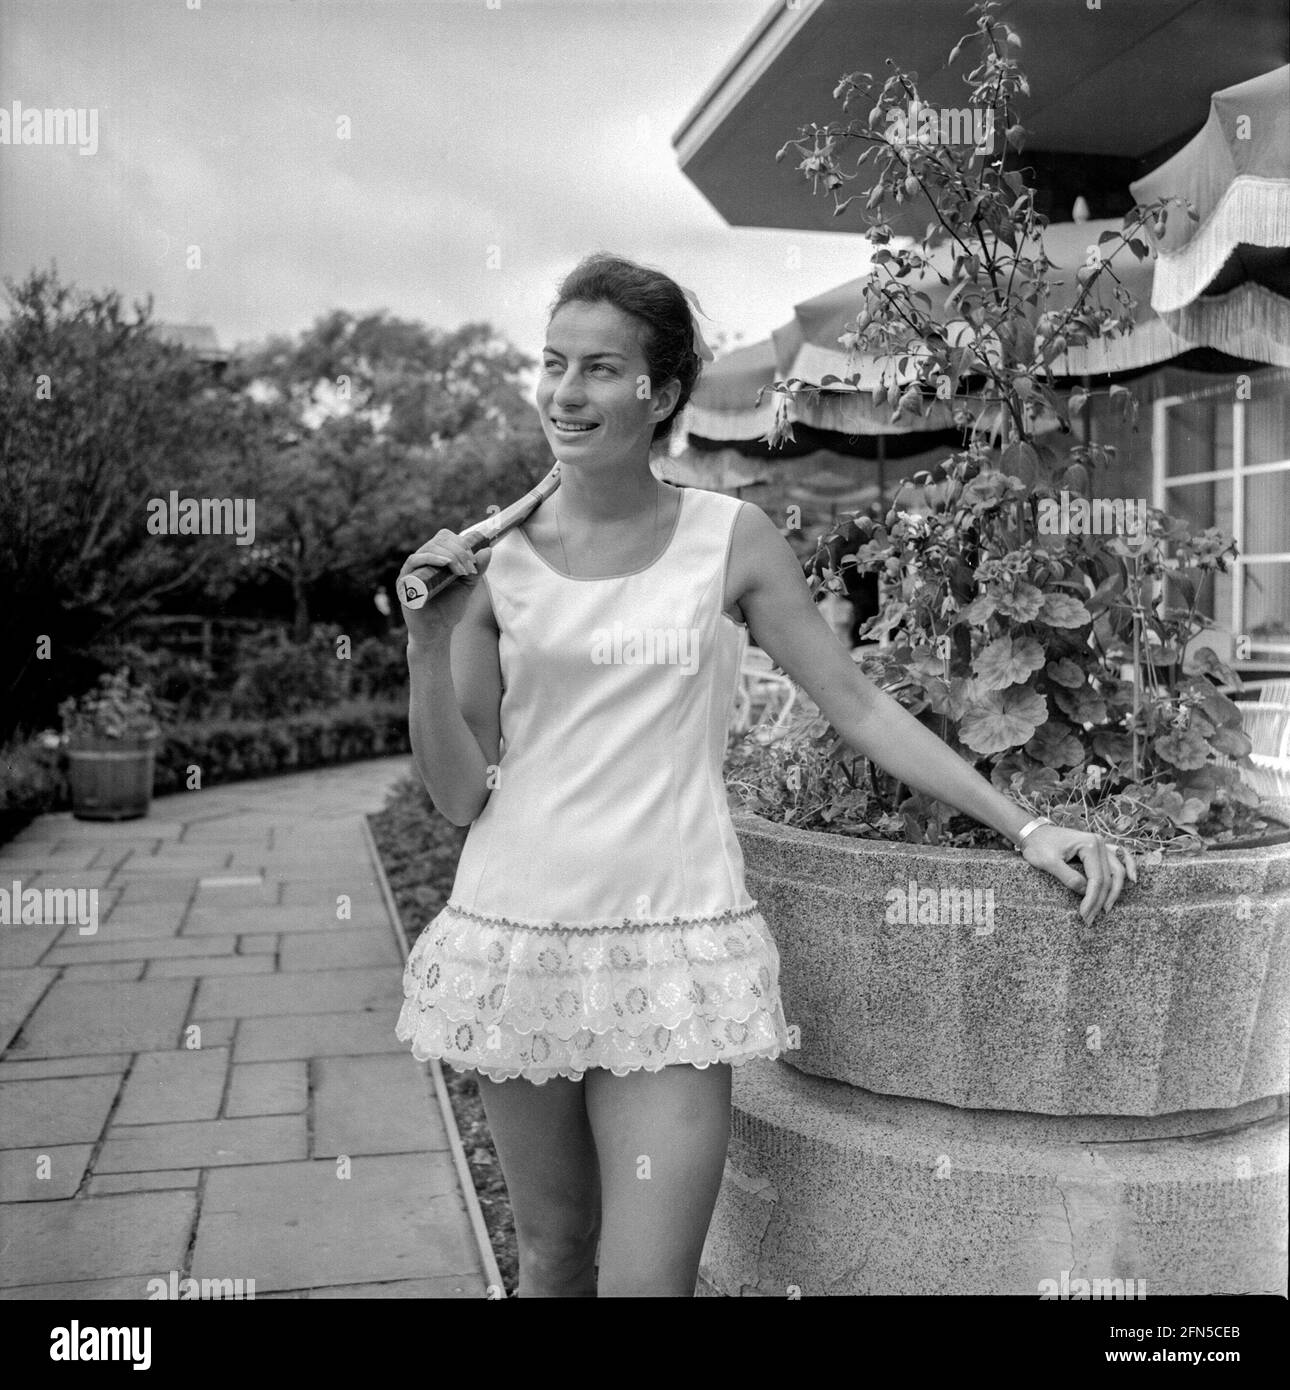 British tennis champion Virginia Wade poses for the camera wearing a new tennis dress designed by Teddy Tinling. She is seen in the roof garden of Derry and Toms in Kensington, London. Stock Photo